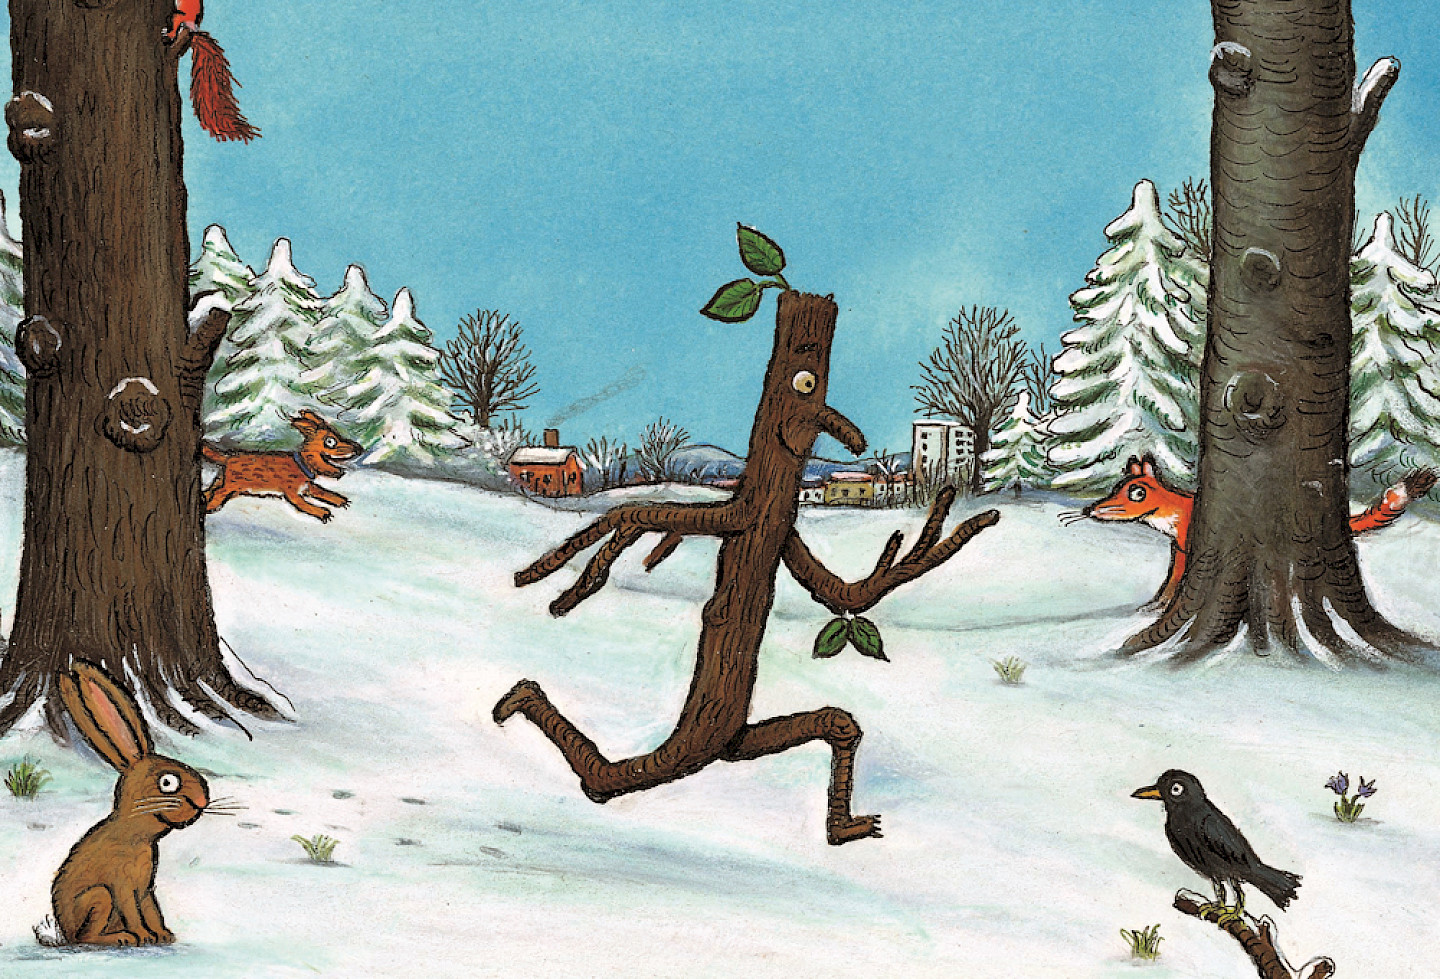 Der Stockmann (c) Axel Scheffler, 2008, Reproduced with the permission of Scholastic Children’s Books